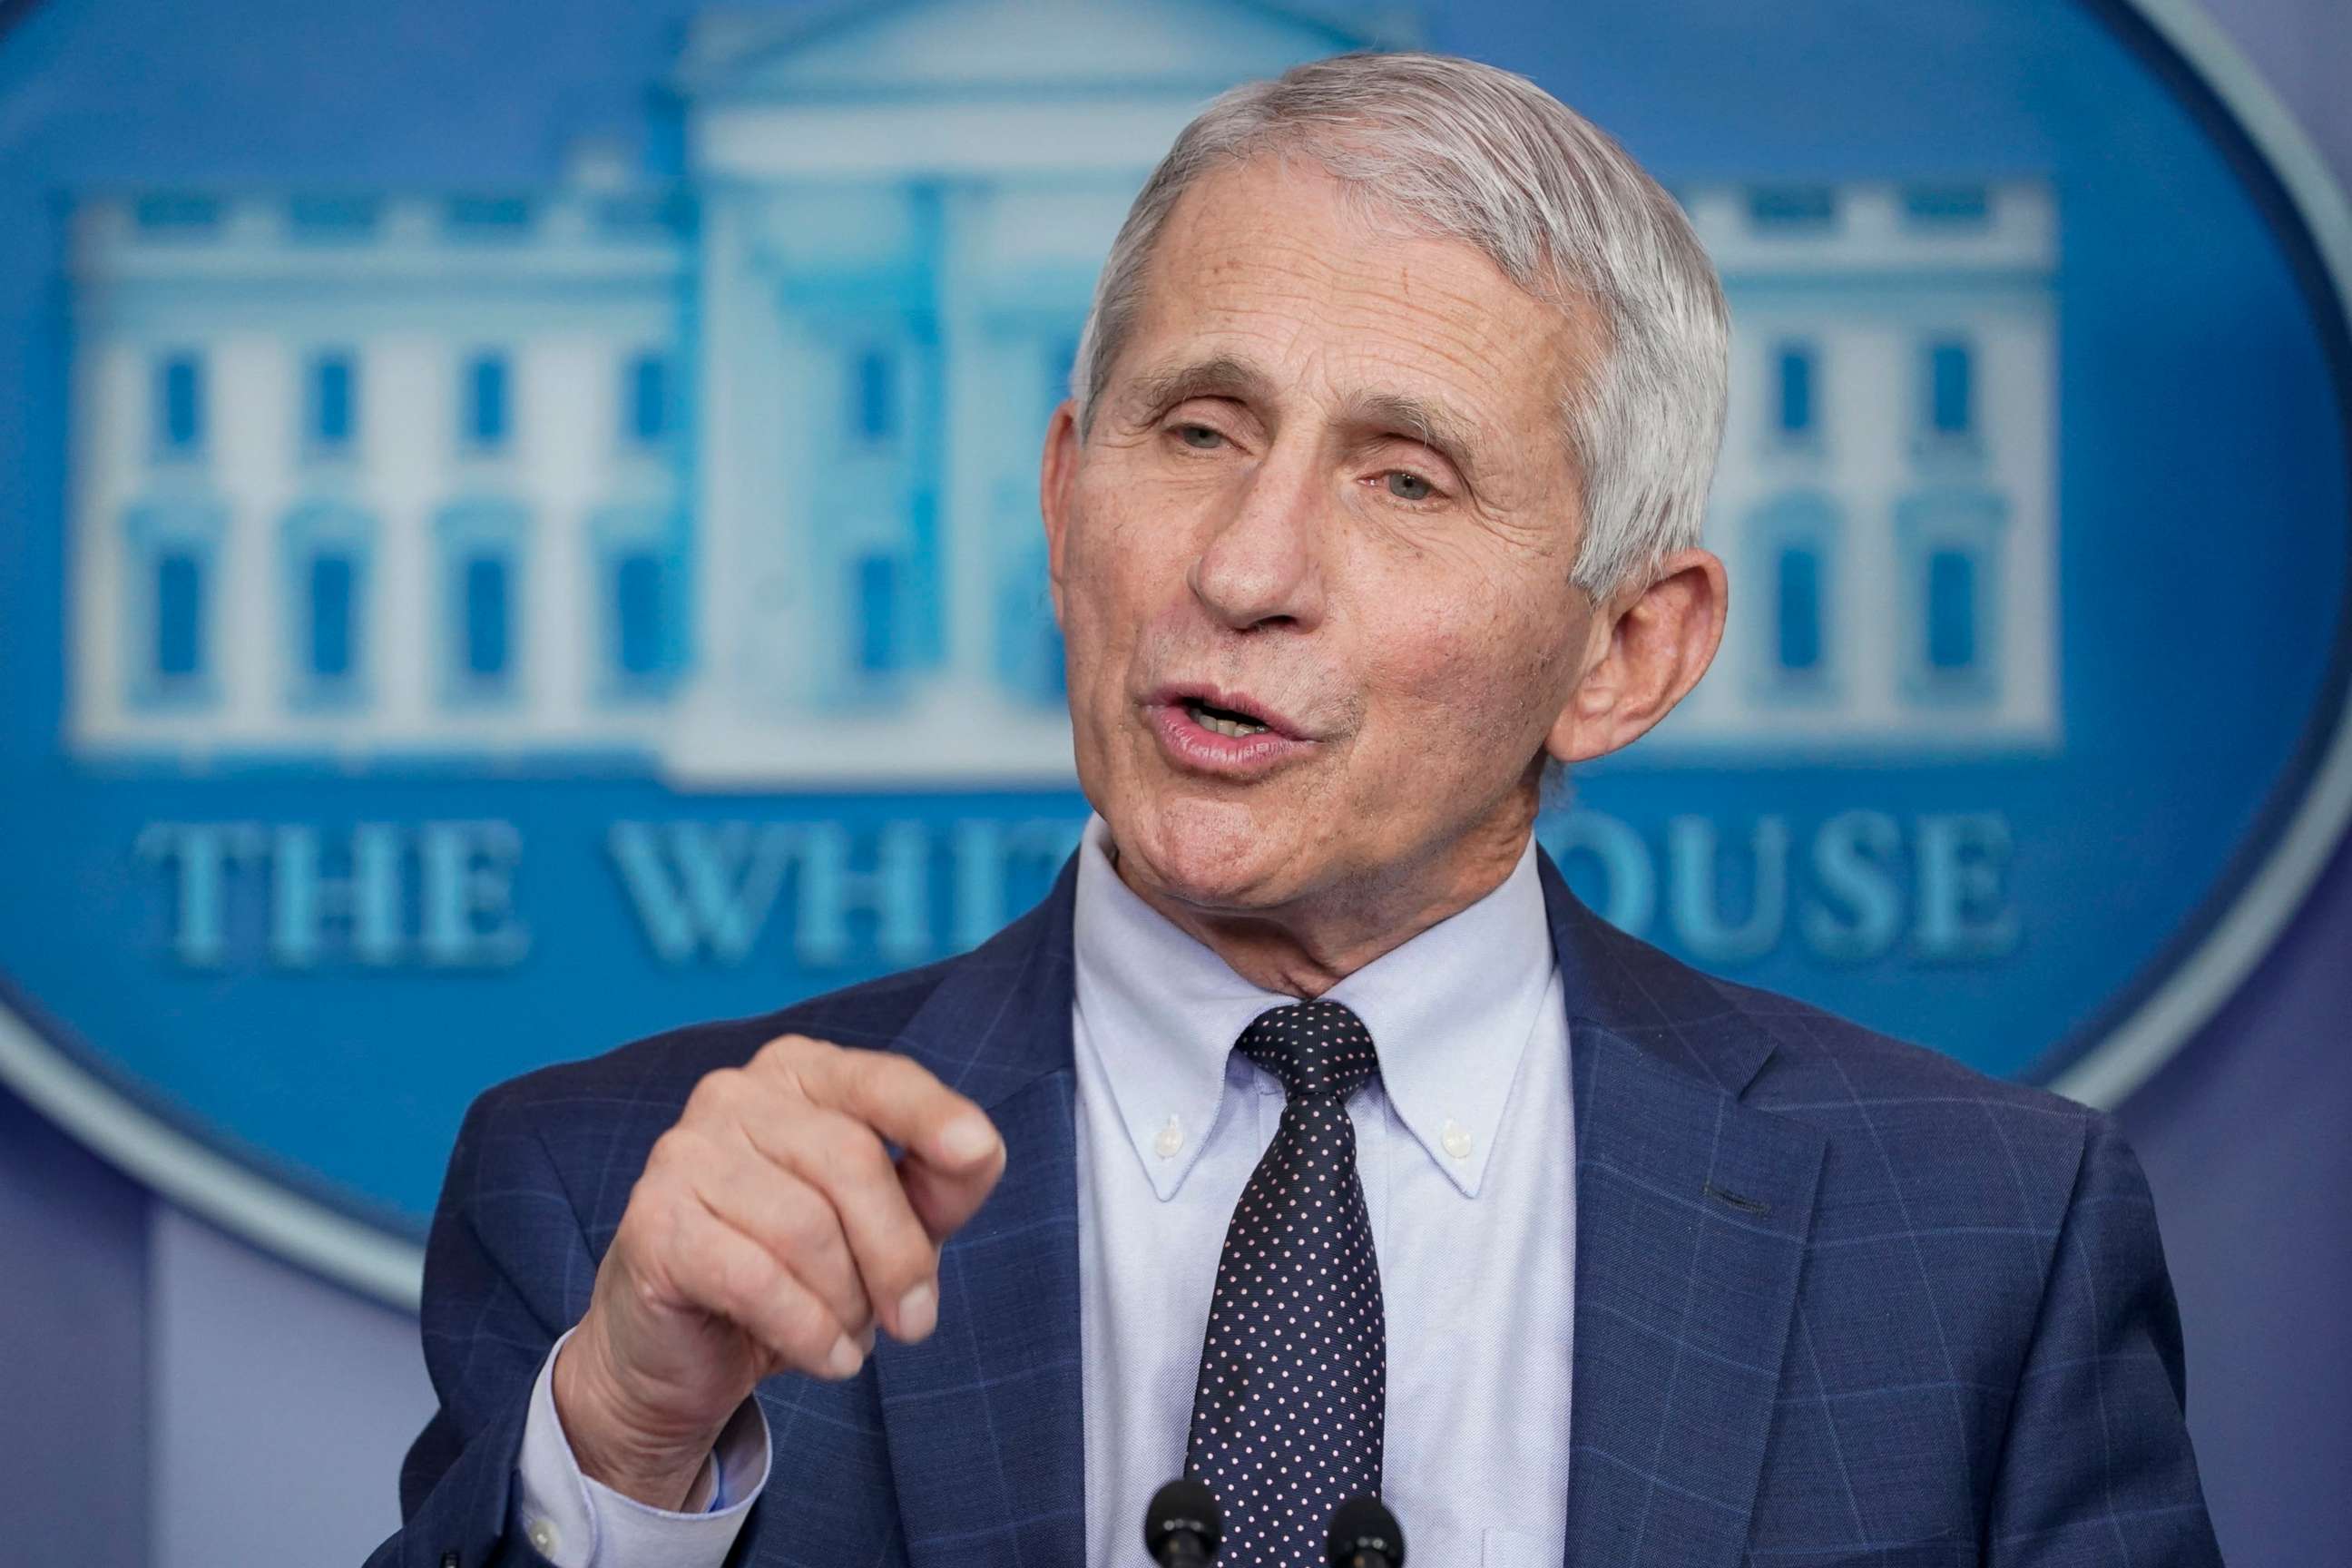 PHOTO: Dr. Anthony Fauci, director of the National Institute of Allergy and Infectious Diseases, speaks during the daily briefing at the White House in Washington on Dec. 1, 2021.